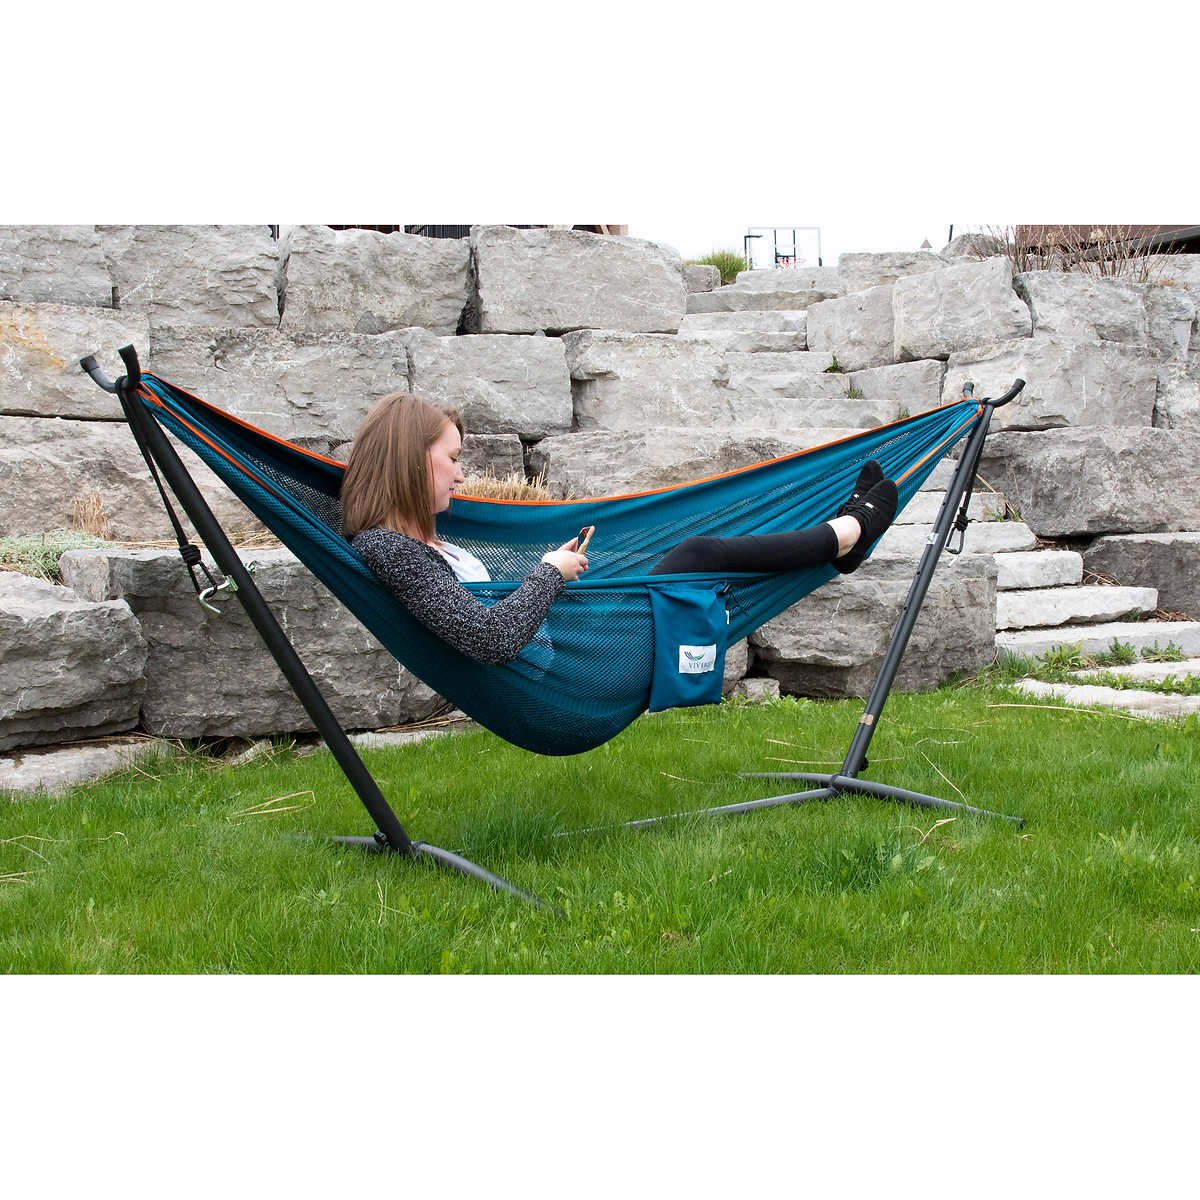 Cameo Vivere C8SPSN-CA Hammock with Stand